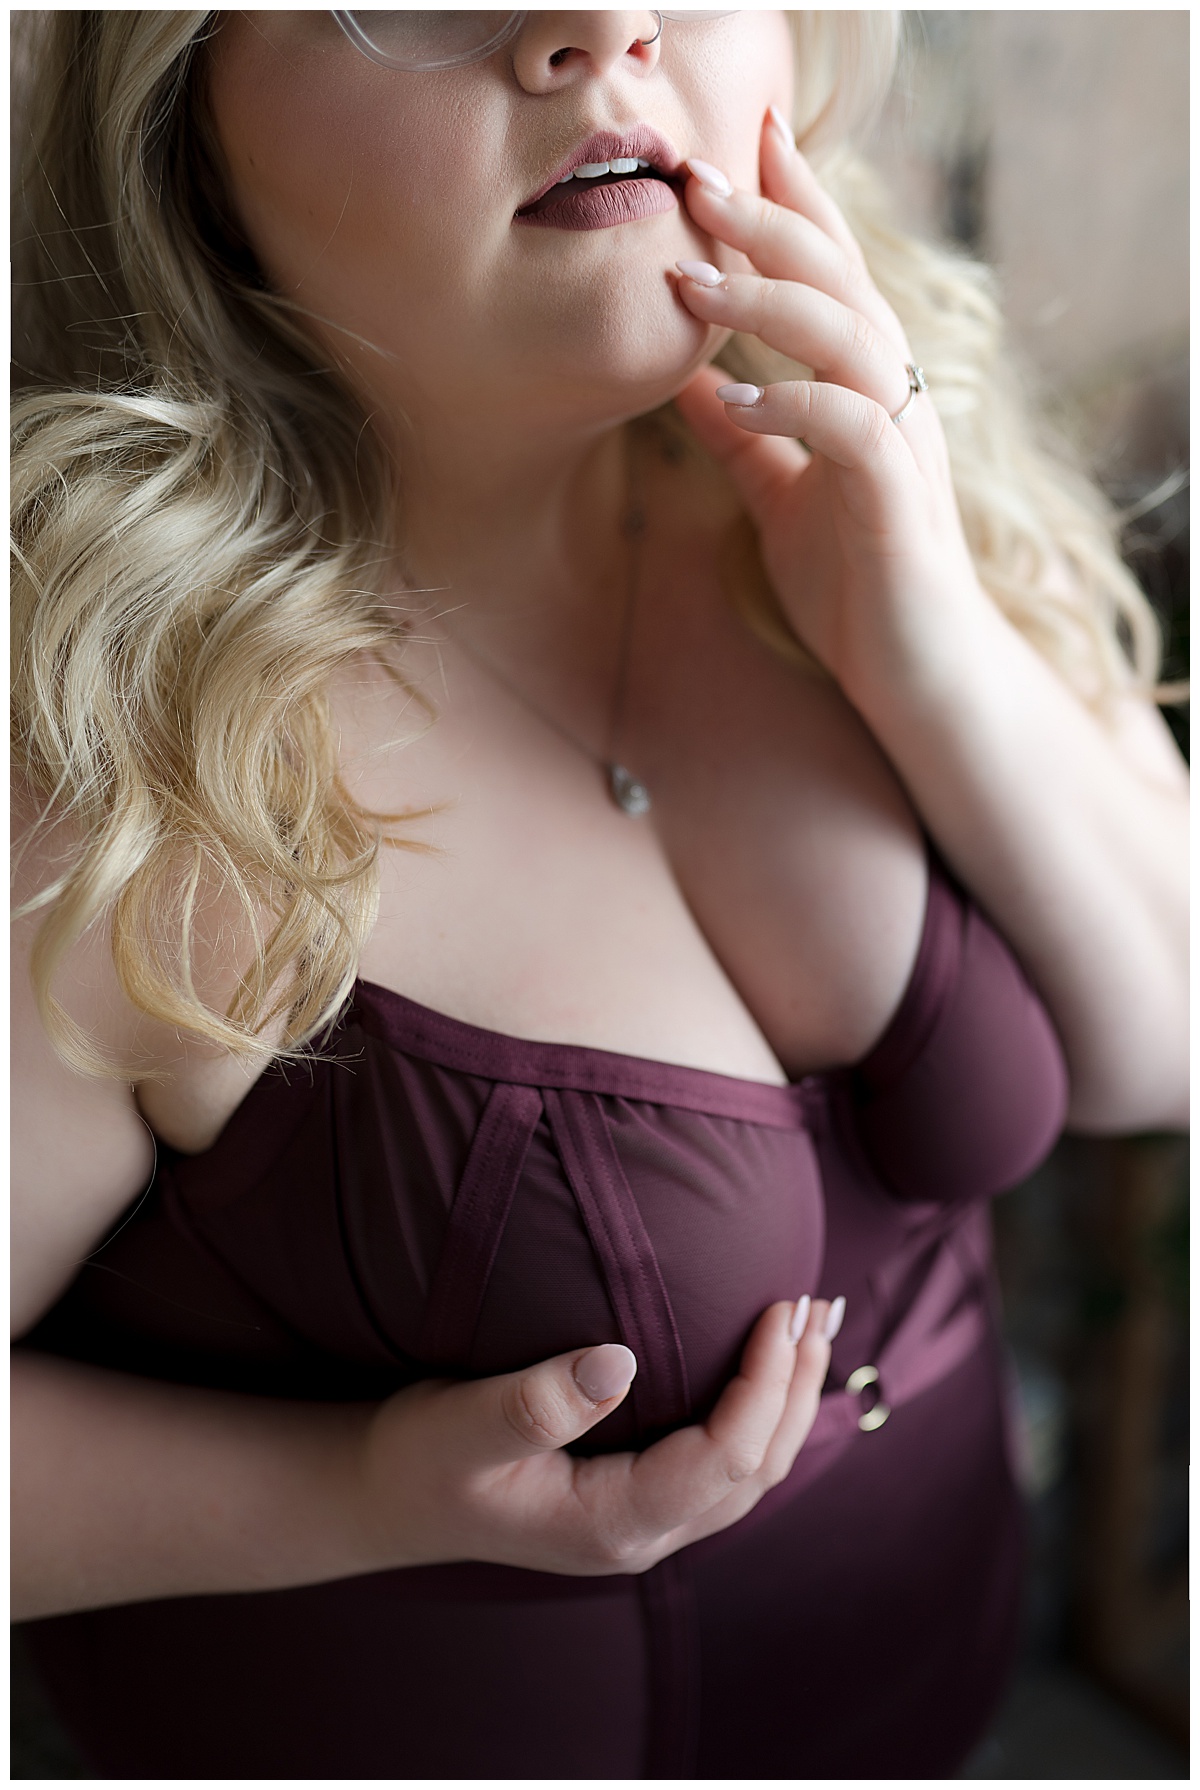 Lady grabs chest for Emma Christine Photography